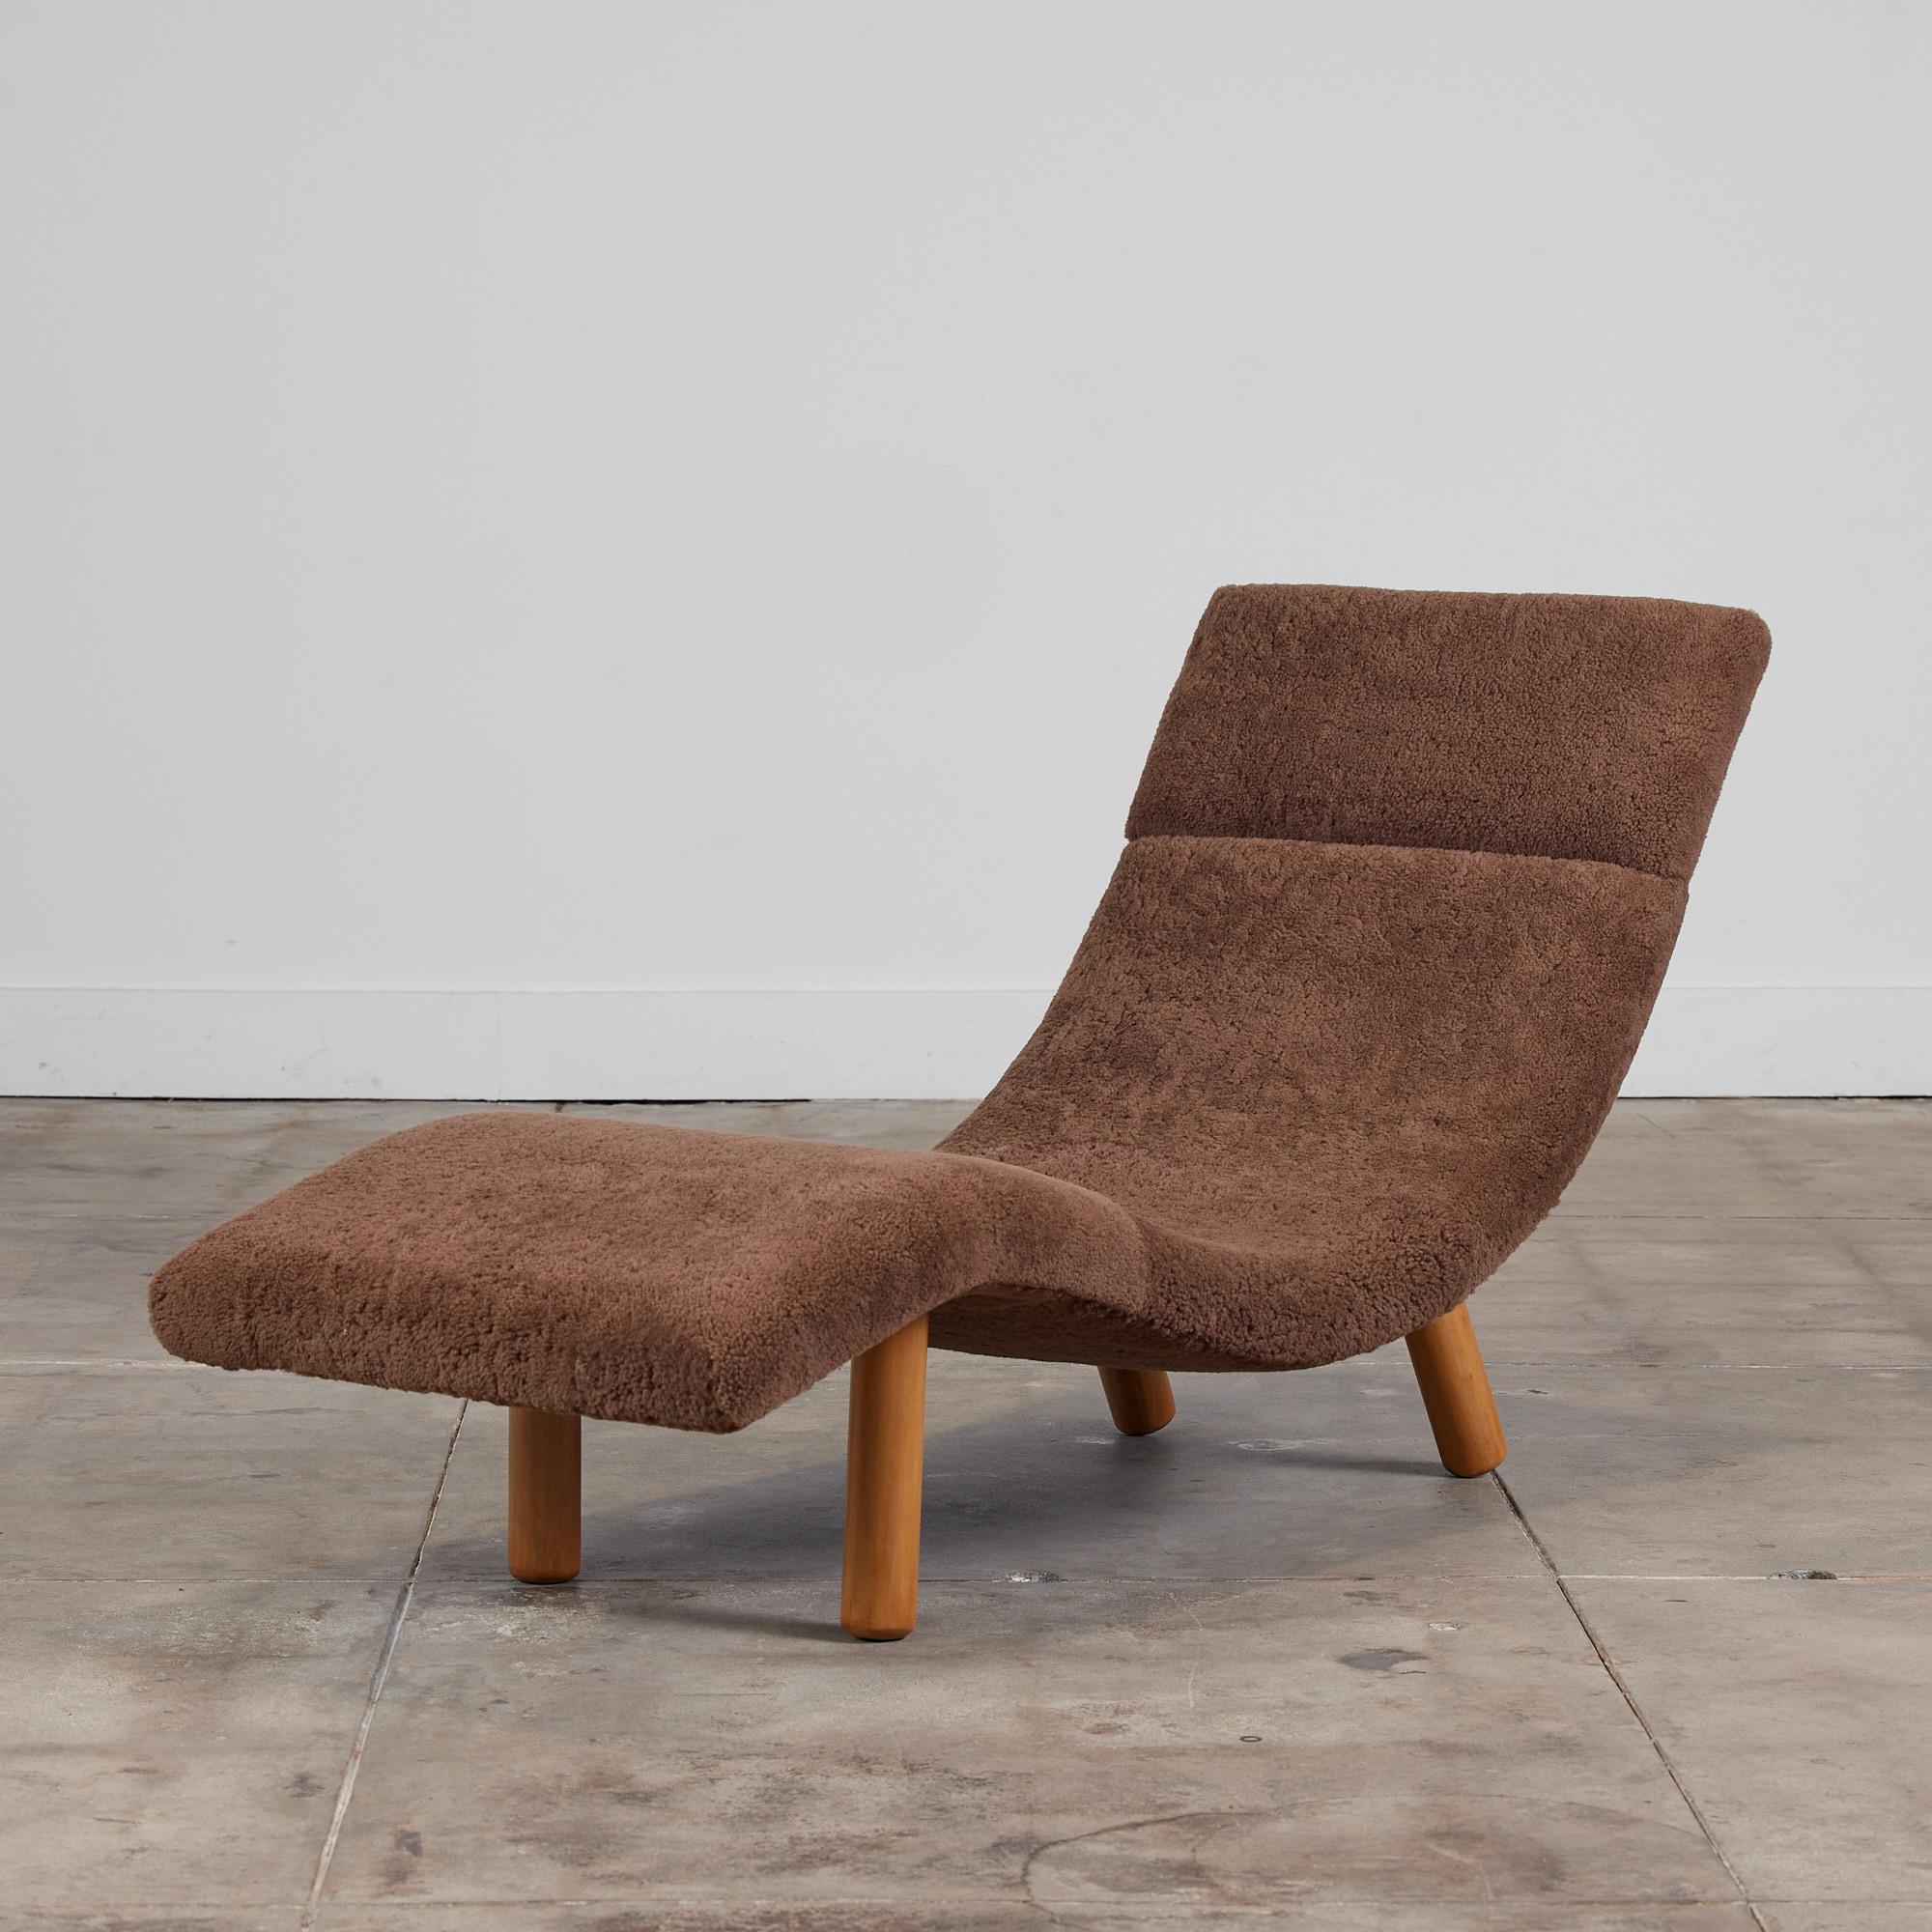 Wave chaise lounge by Enrico Bartolini, c.1970s, USA. The sculptural chaise features a chocolate brown shearling and birch cylindrical legs. The back of the chaise shows two birch wood bars with two metal screw details.

Dimensions: 58